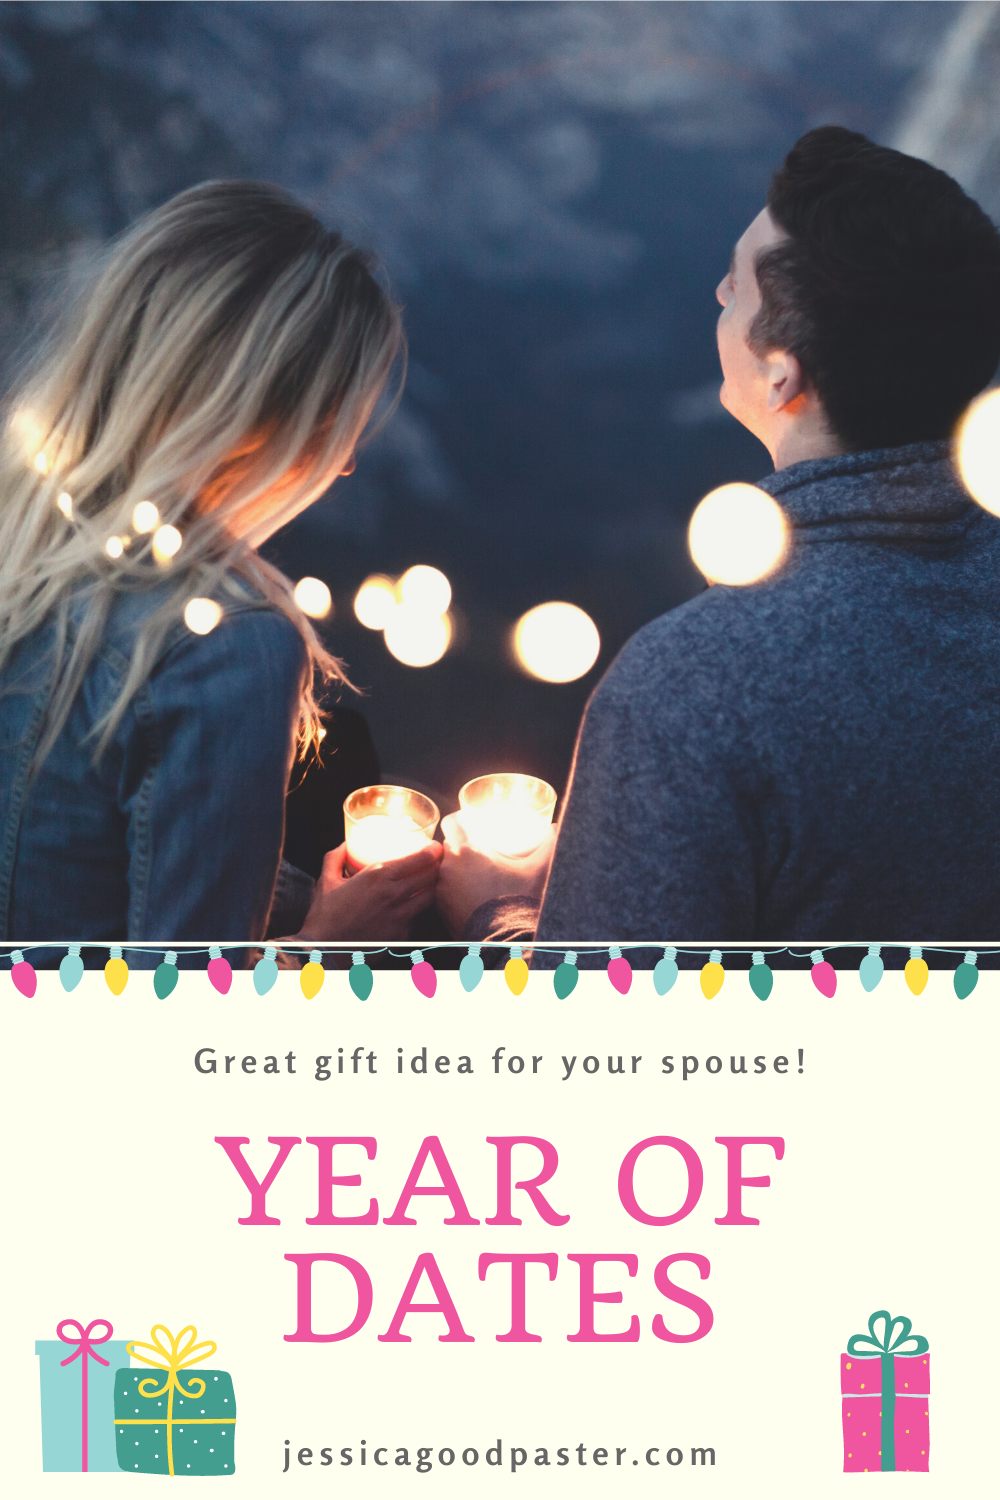 Make A Year of Dates the Best Gift Ever | Time together is the best way to celebrate your husband, wife, boyfriend, or girlfriend! A year of preplanned dates is the gift that keeps on giving. Includes 12 fun date night ideas for any budget. #datenight #dateideas #valentinesday #giftideas #yearofdates #anniversary